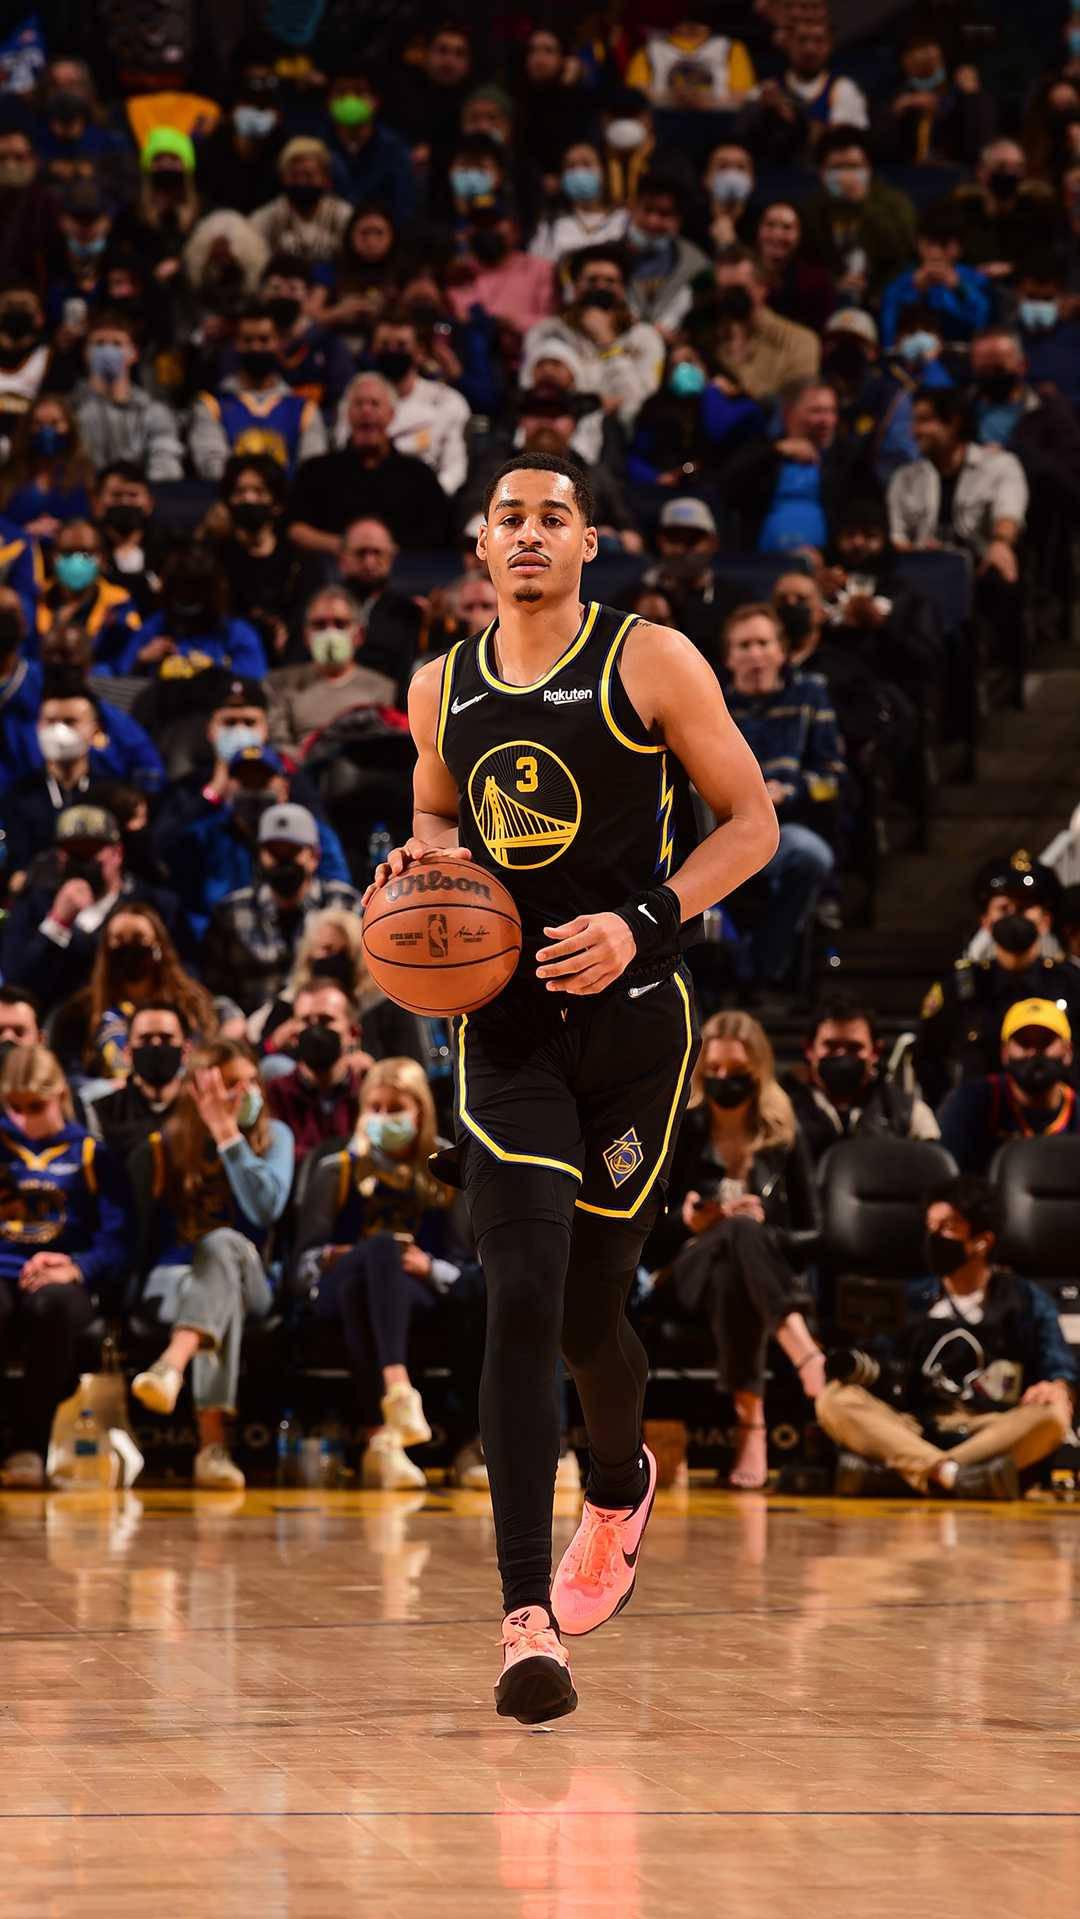 Jordan Poole Wallpaper Browse Jordan Poole Wallpaper with collections of  Basketball Damionlee Godubs Goldenstate Jordan Poole ht  Poole  Jordans Nba players